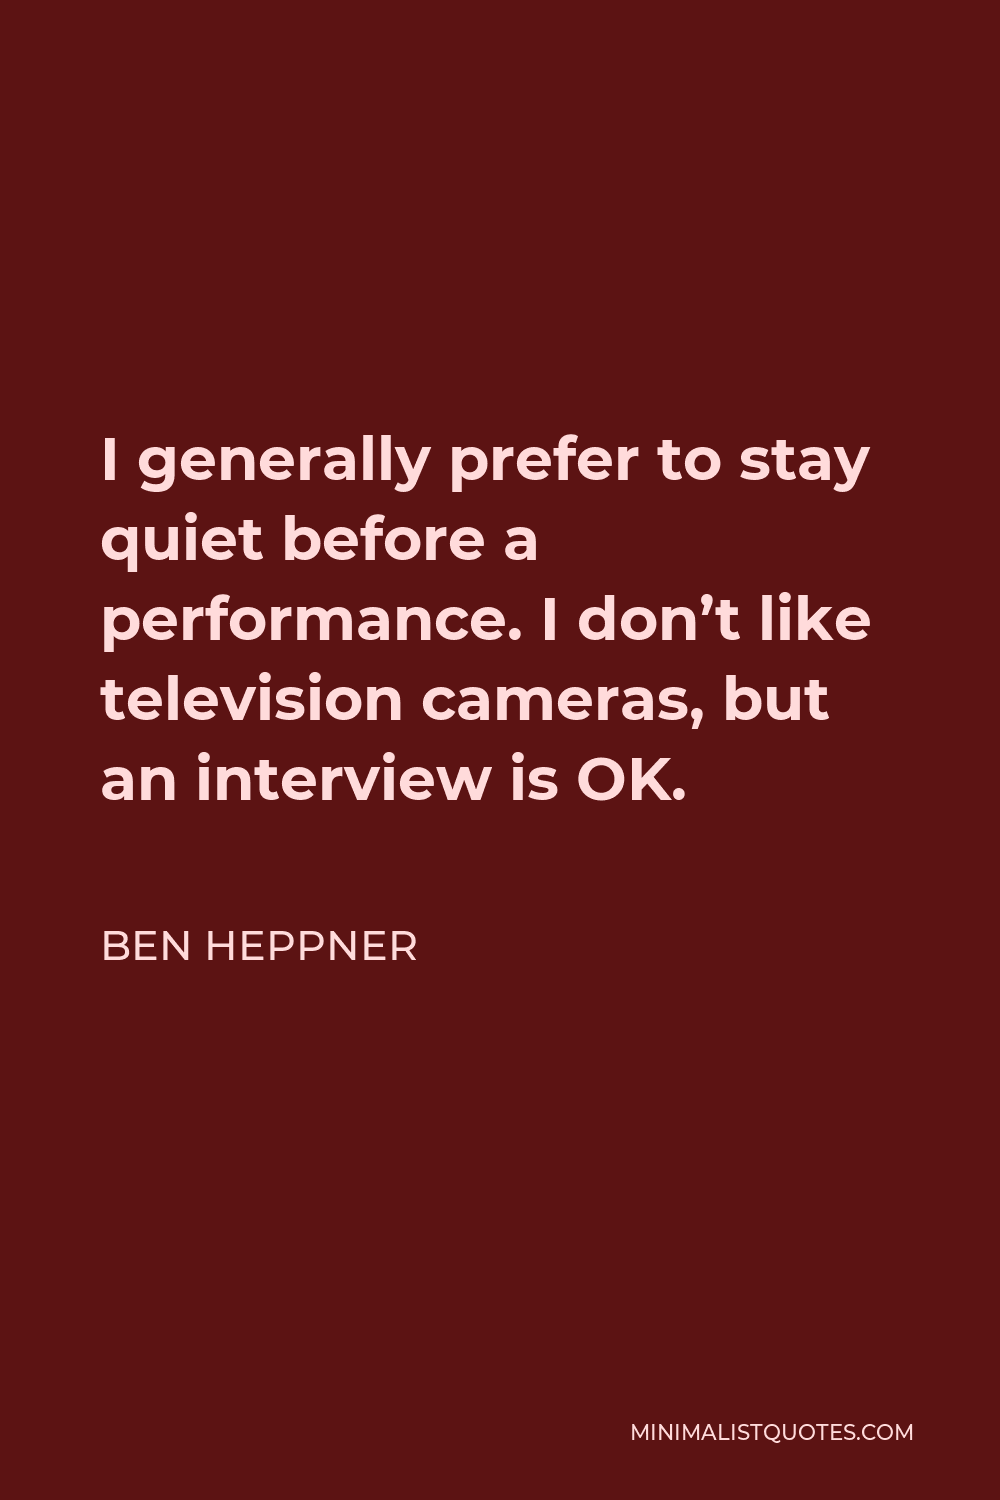 Ben Heppner Quote - I generally prefer to stay quiet before a performance. I don’t like television cameras, but an interview is OK.